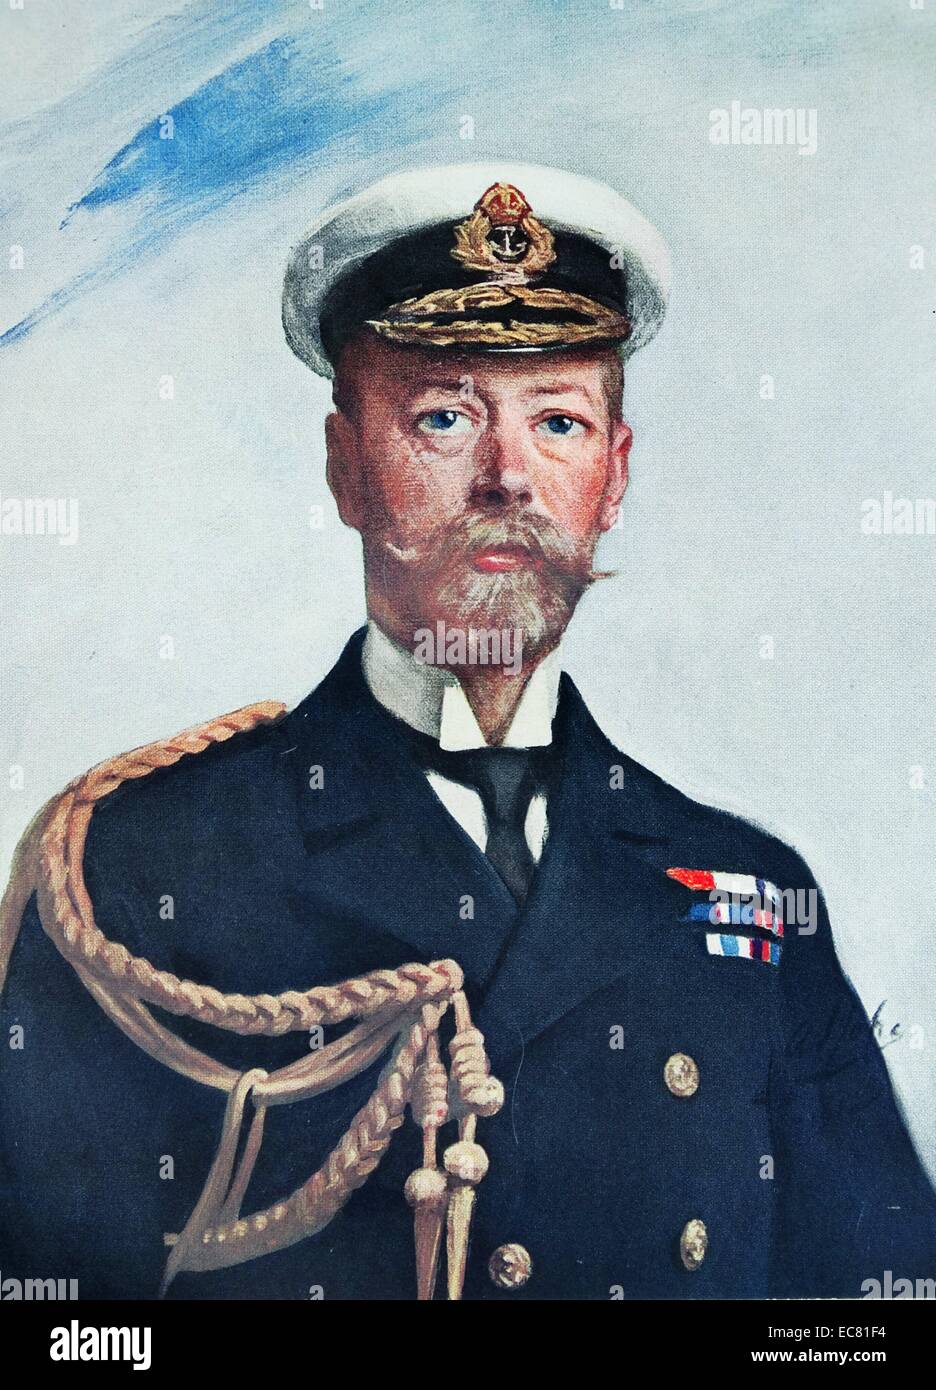 Prince Edward (later King Edward VII of Great Britain) wears his 'Order of the Garter' robes in a colour illustration 1914. Stock Photo